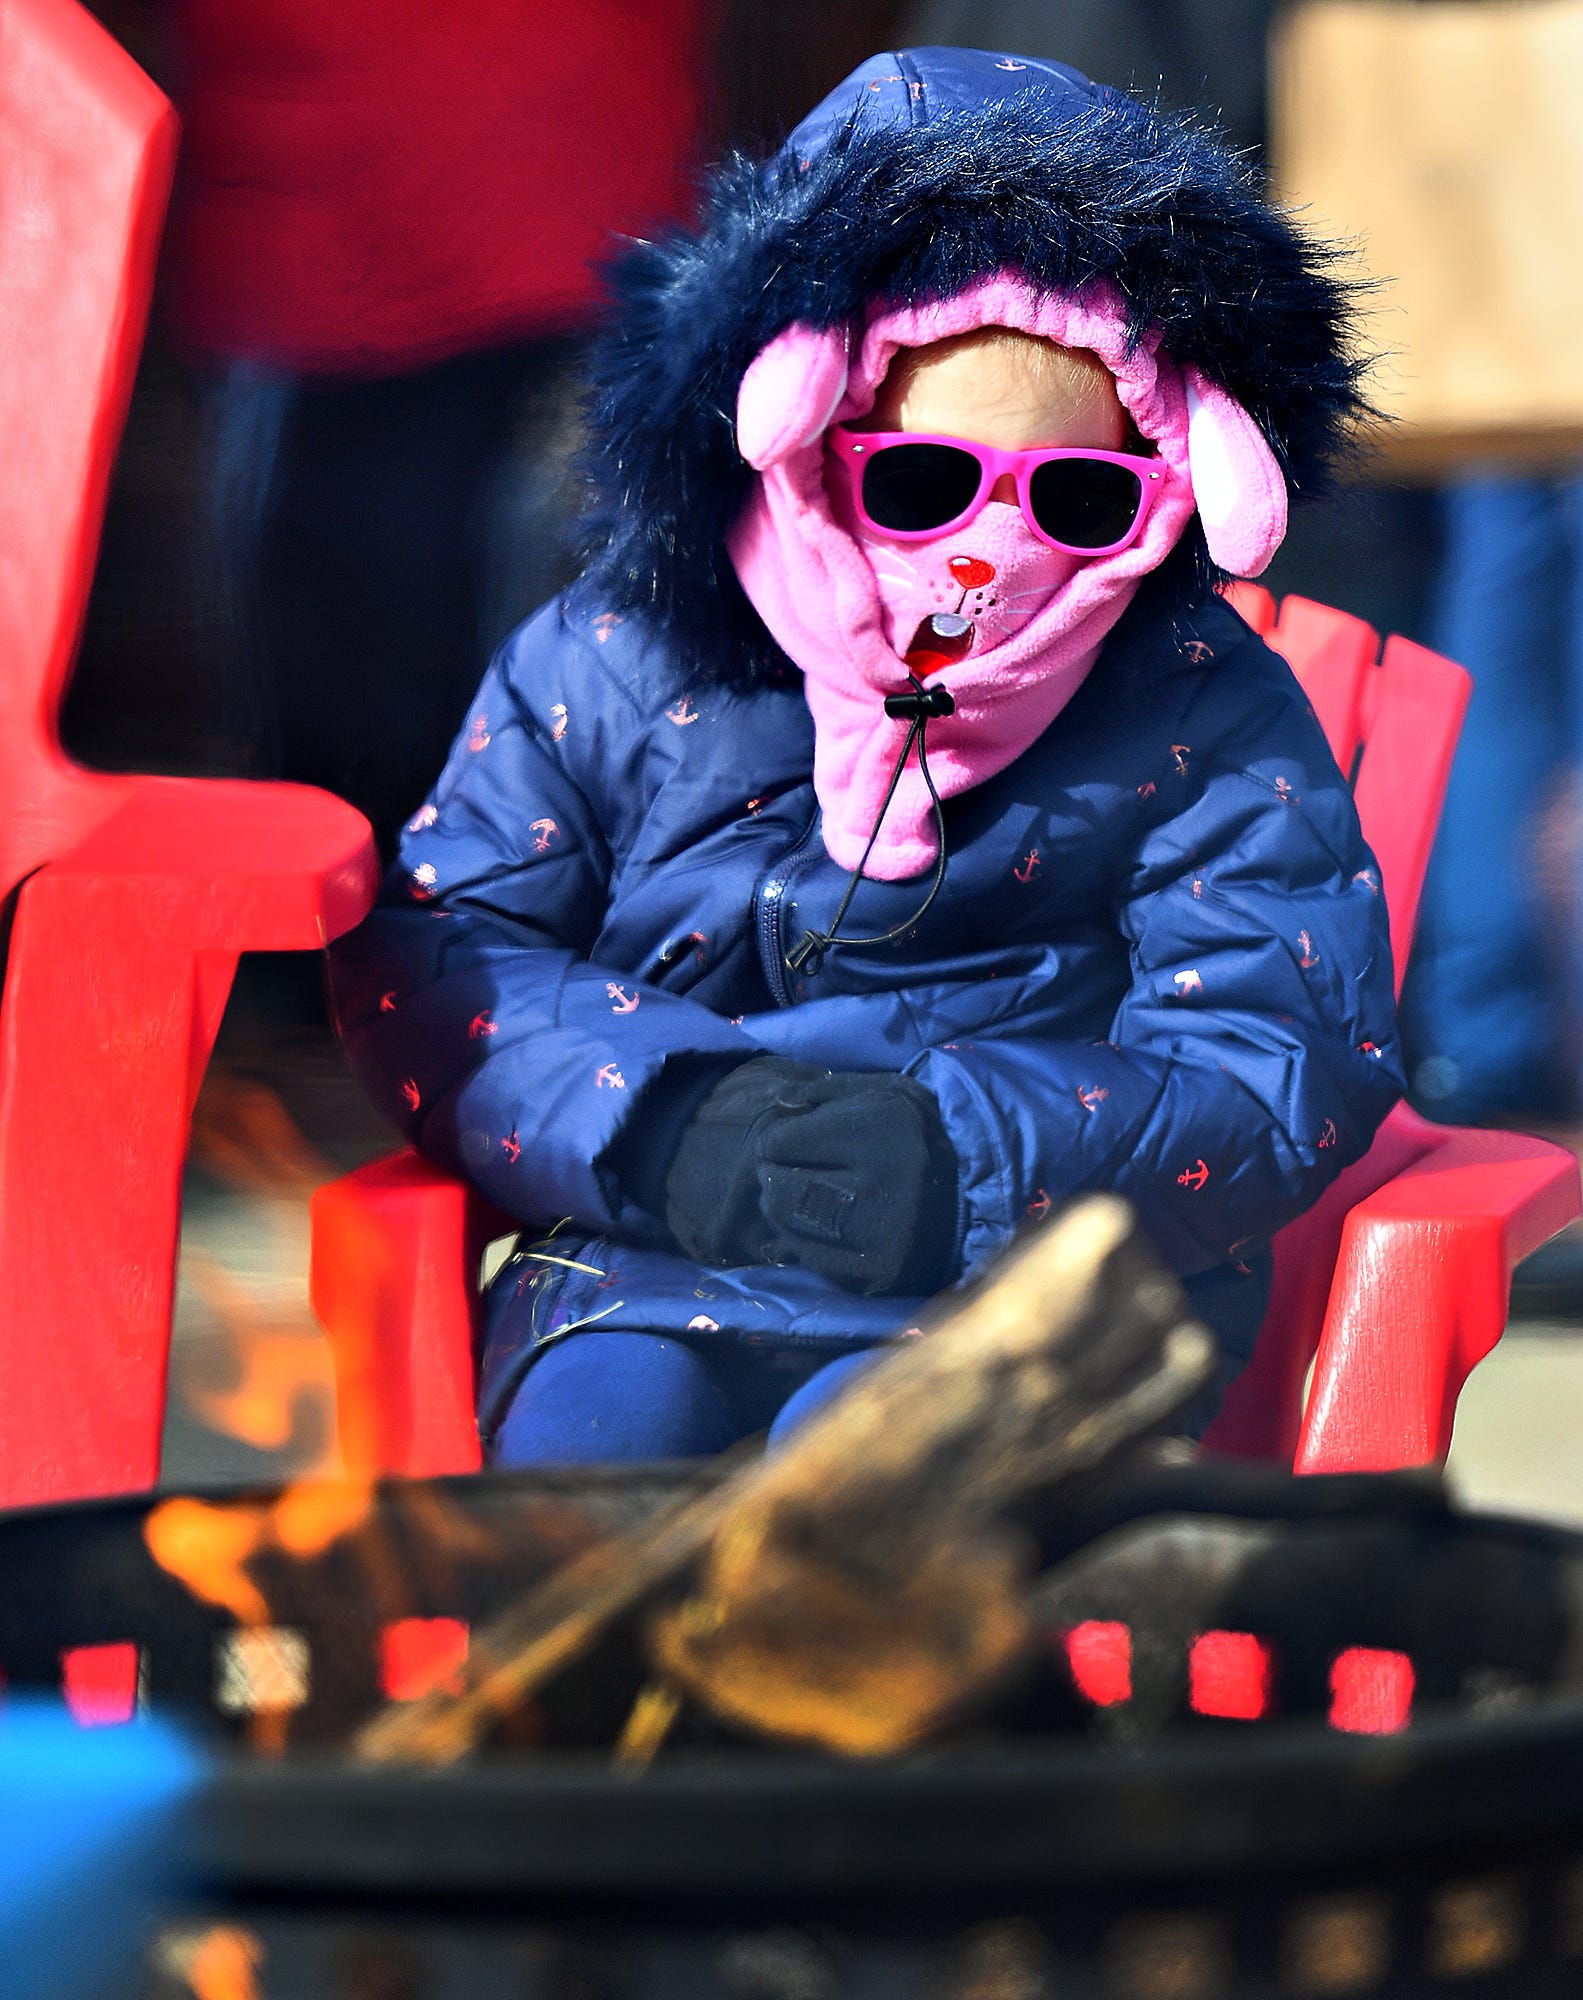 Bethany Mulliken, 5, of Lewisberry, warms herself by the fire pit during the 8th annual FestivICE event in downtown York City, Saturday, Jan. 15, 2022. Dawn J. Sagert photo